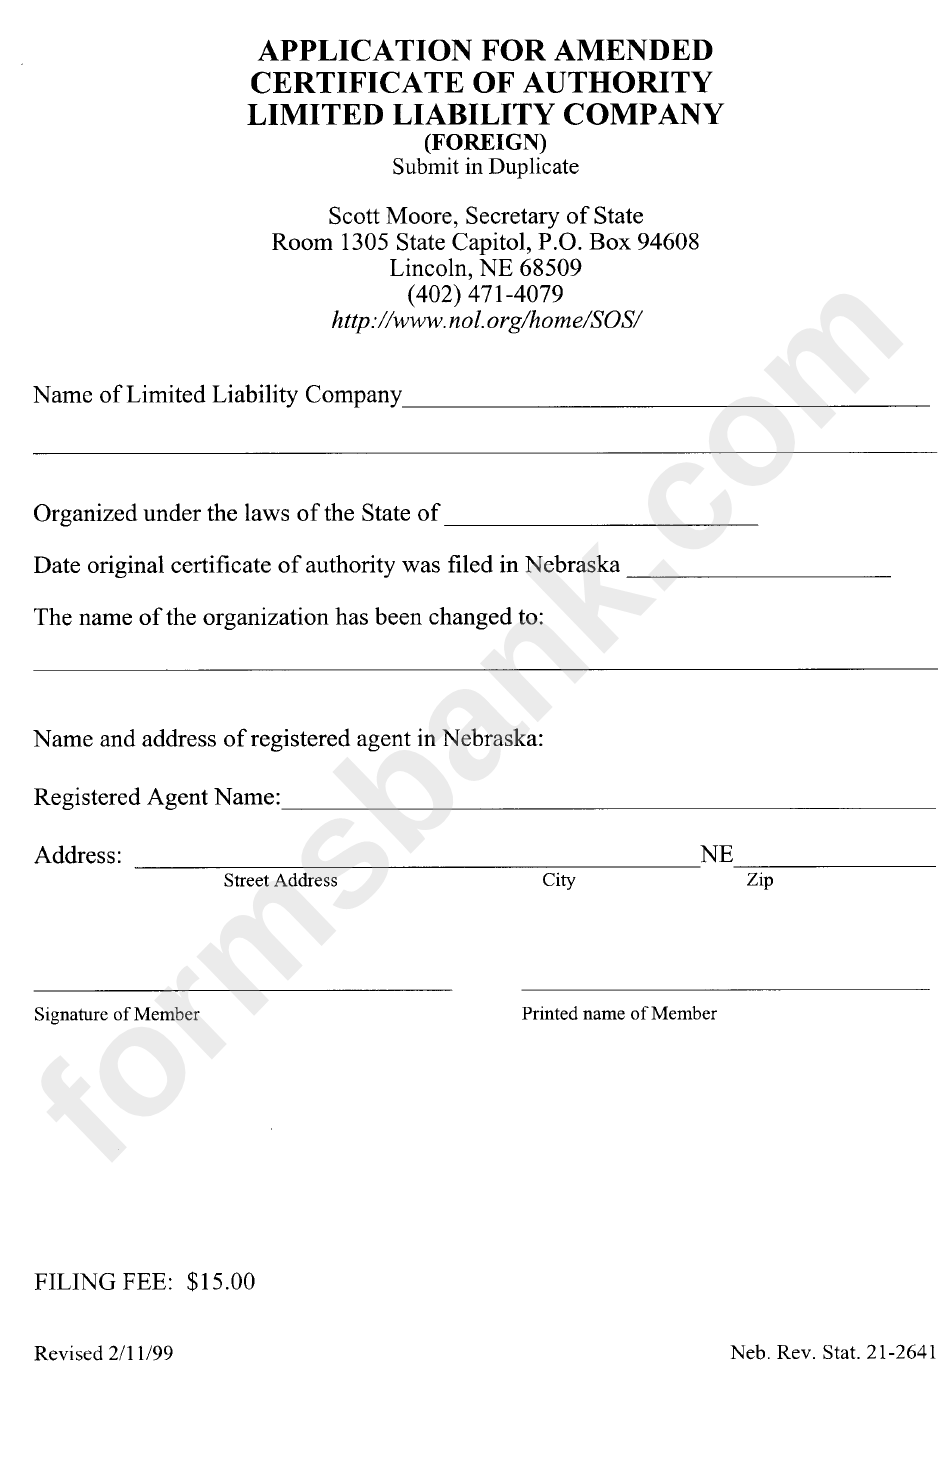 Application For Amended Certificate Of Authority - Foreign Limited Liability Company - Nebraska Secretary Of State